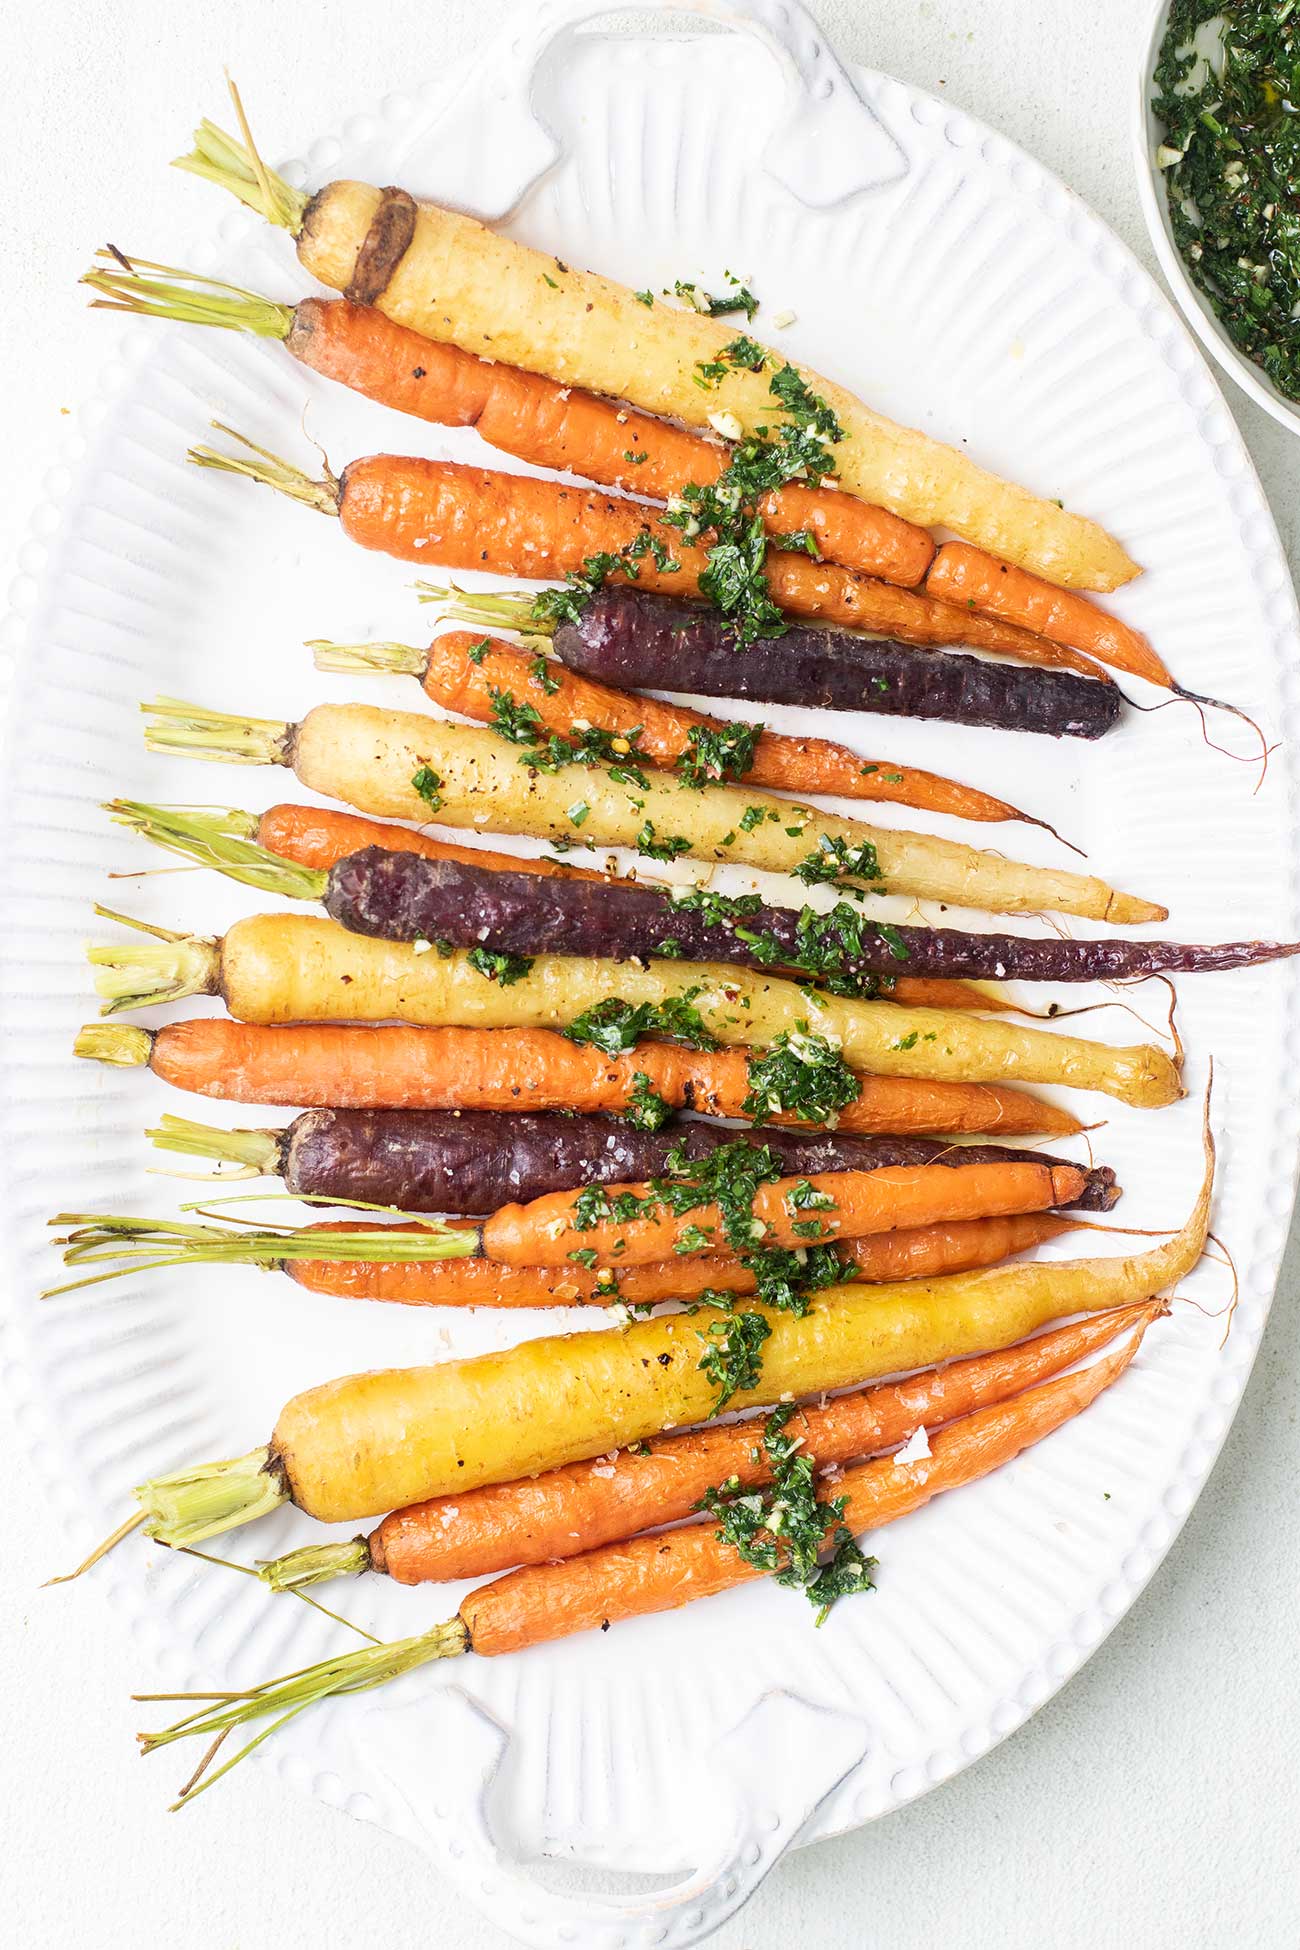 Roasted rainbow carrots shown drizzled with an herby chimichurri.